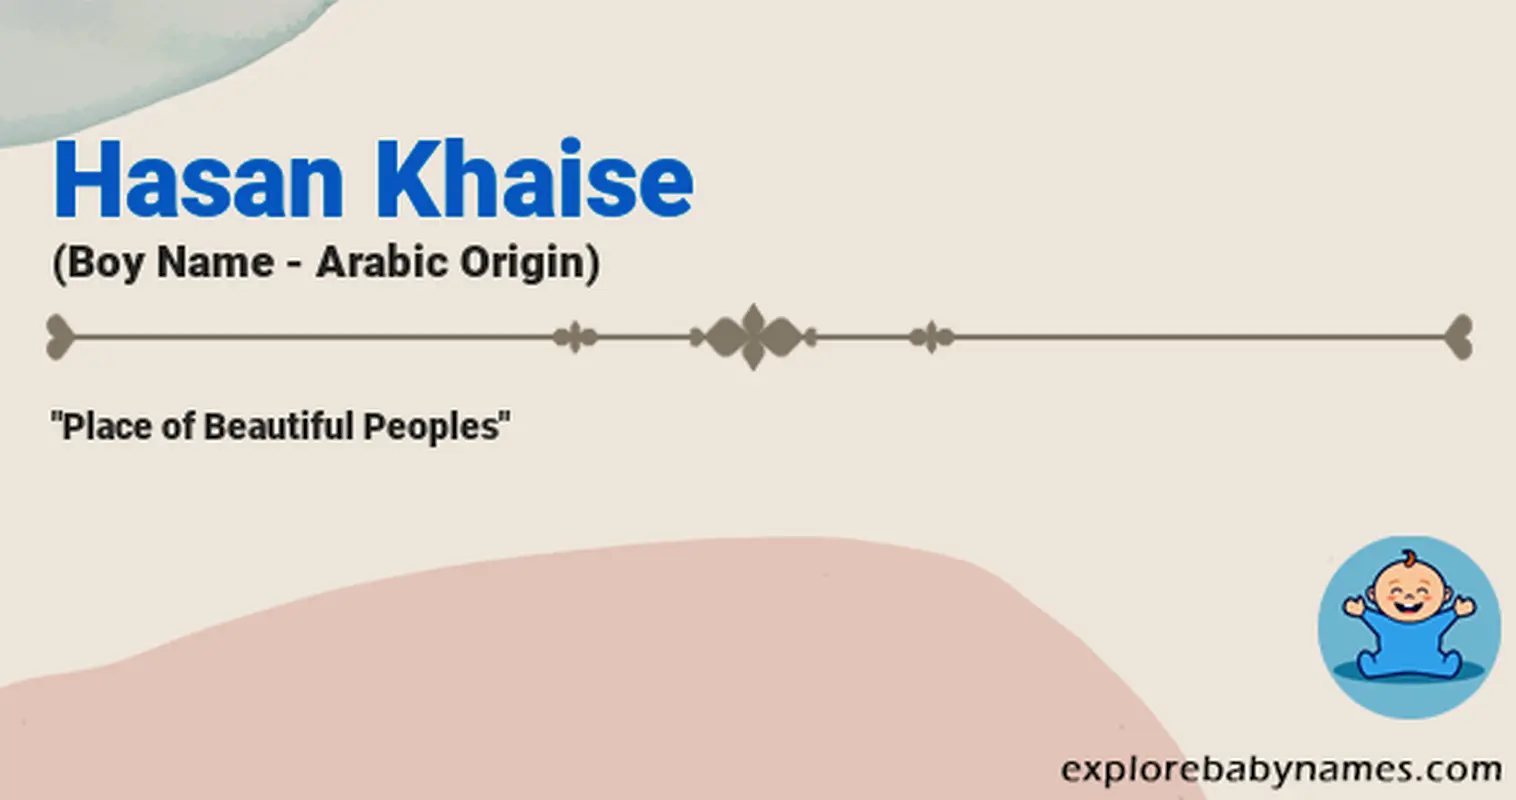 Meaning of Hasan Khaise